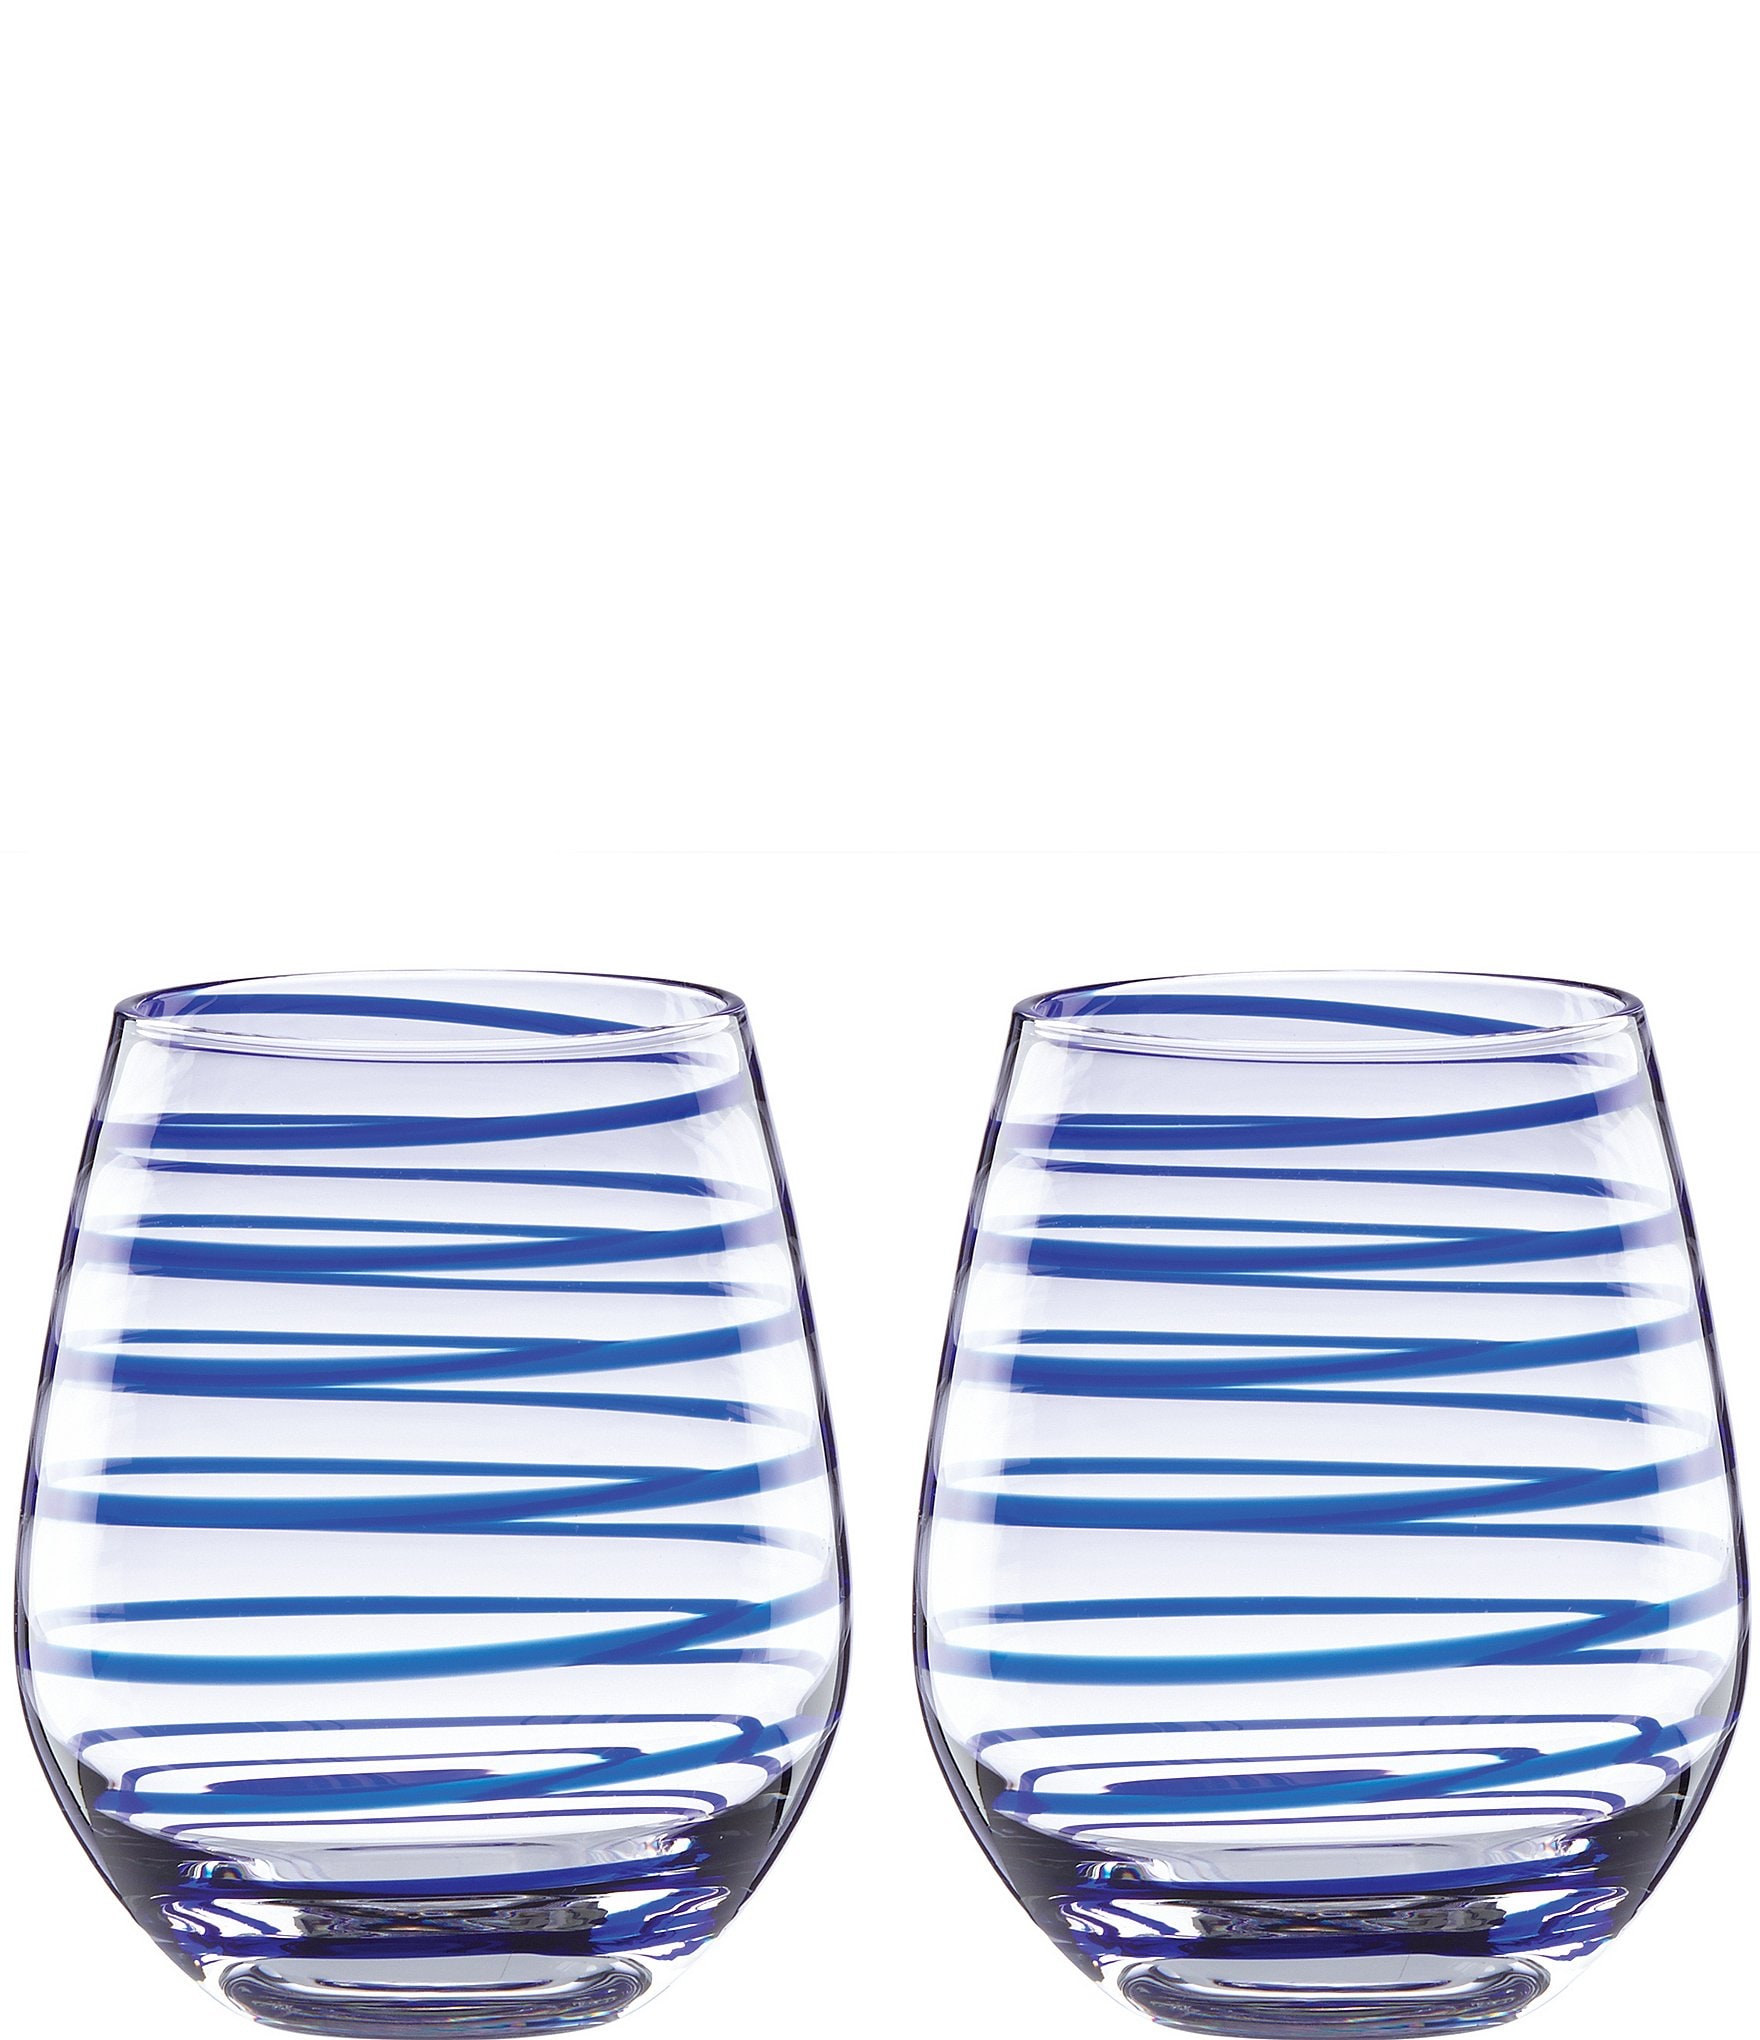 Kate Spade New York Cheers to US Sweet Dry Wine Glasses Set of 2